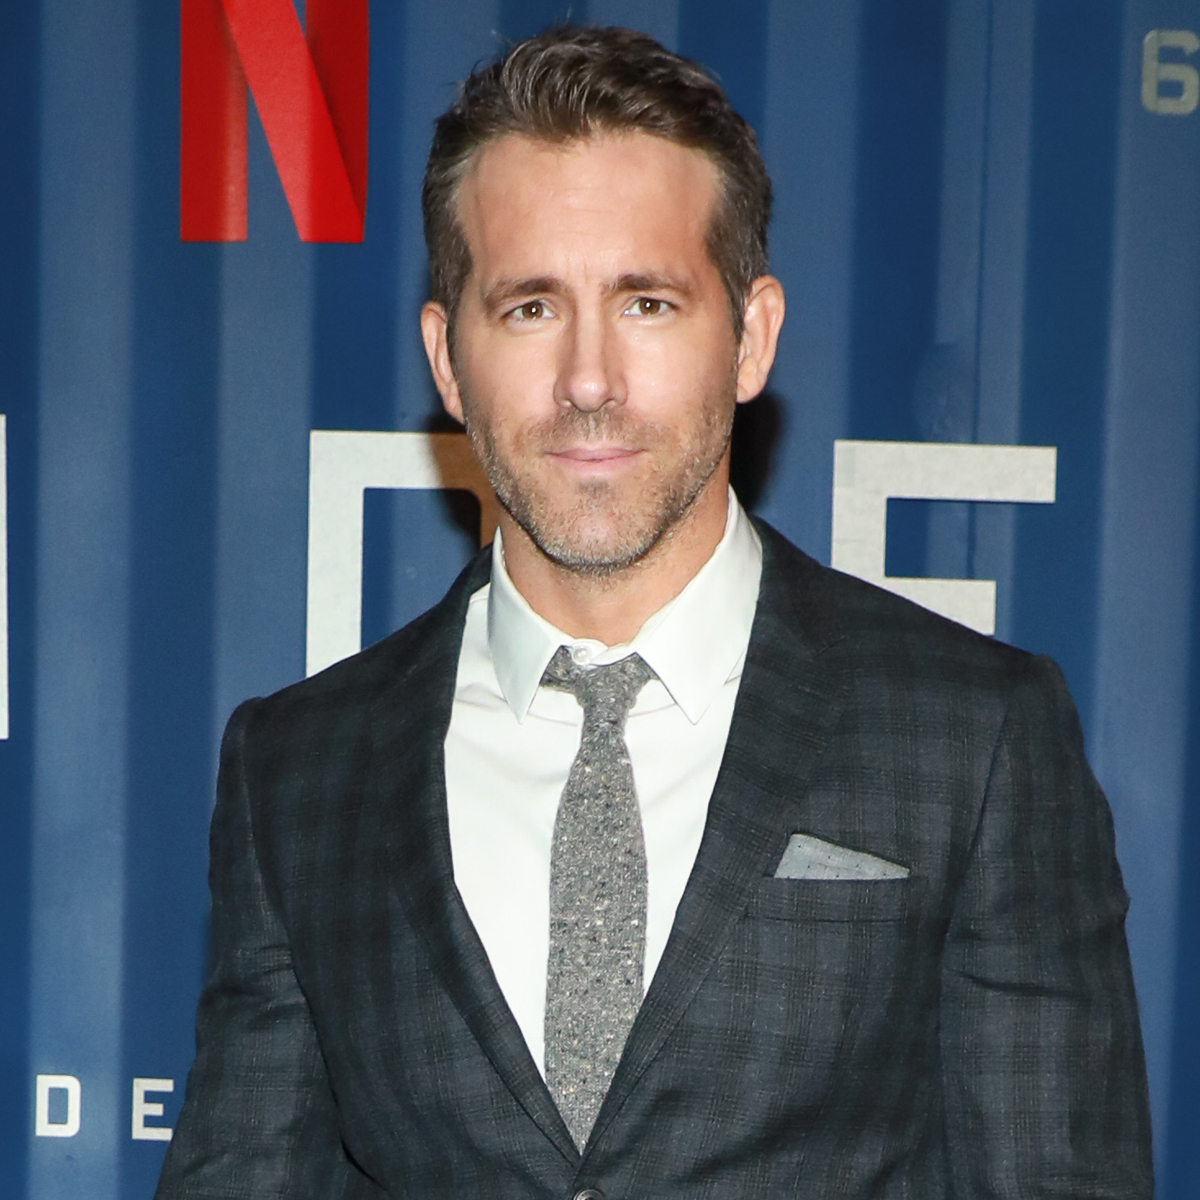 Ryan Reynolds on Why 'Deadpool' Nearly Gave Him a Nervous